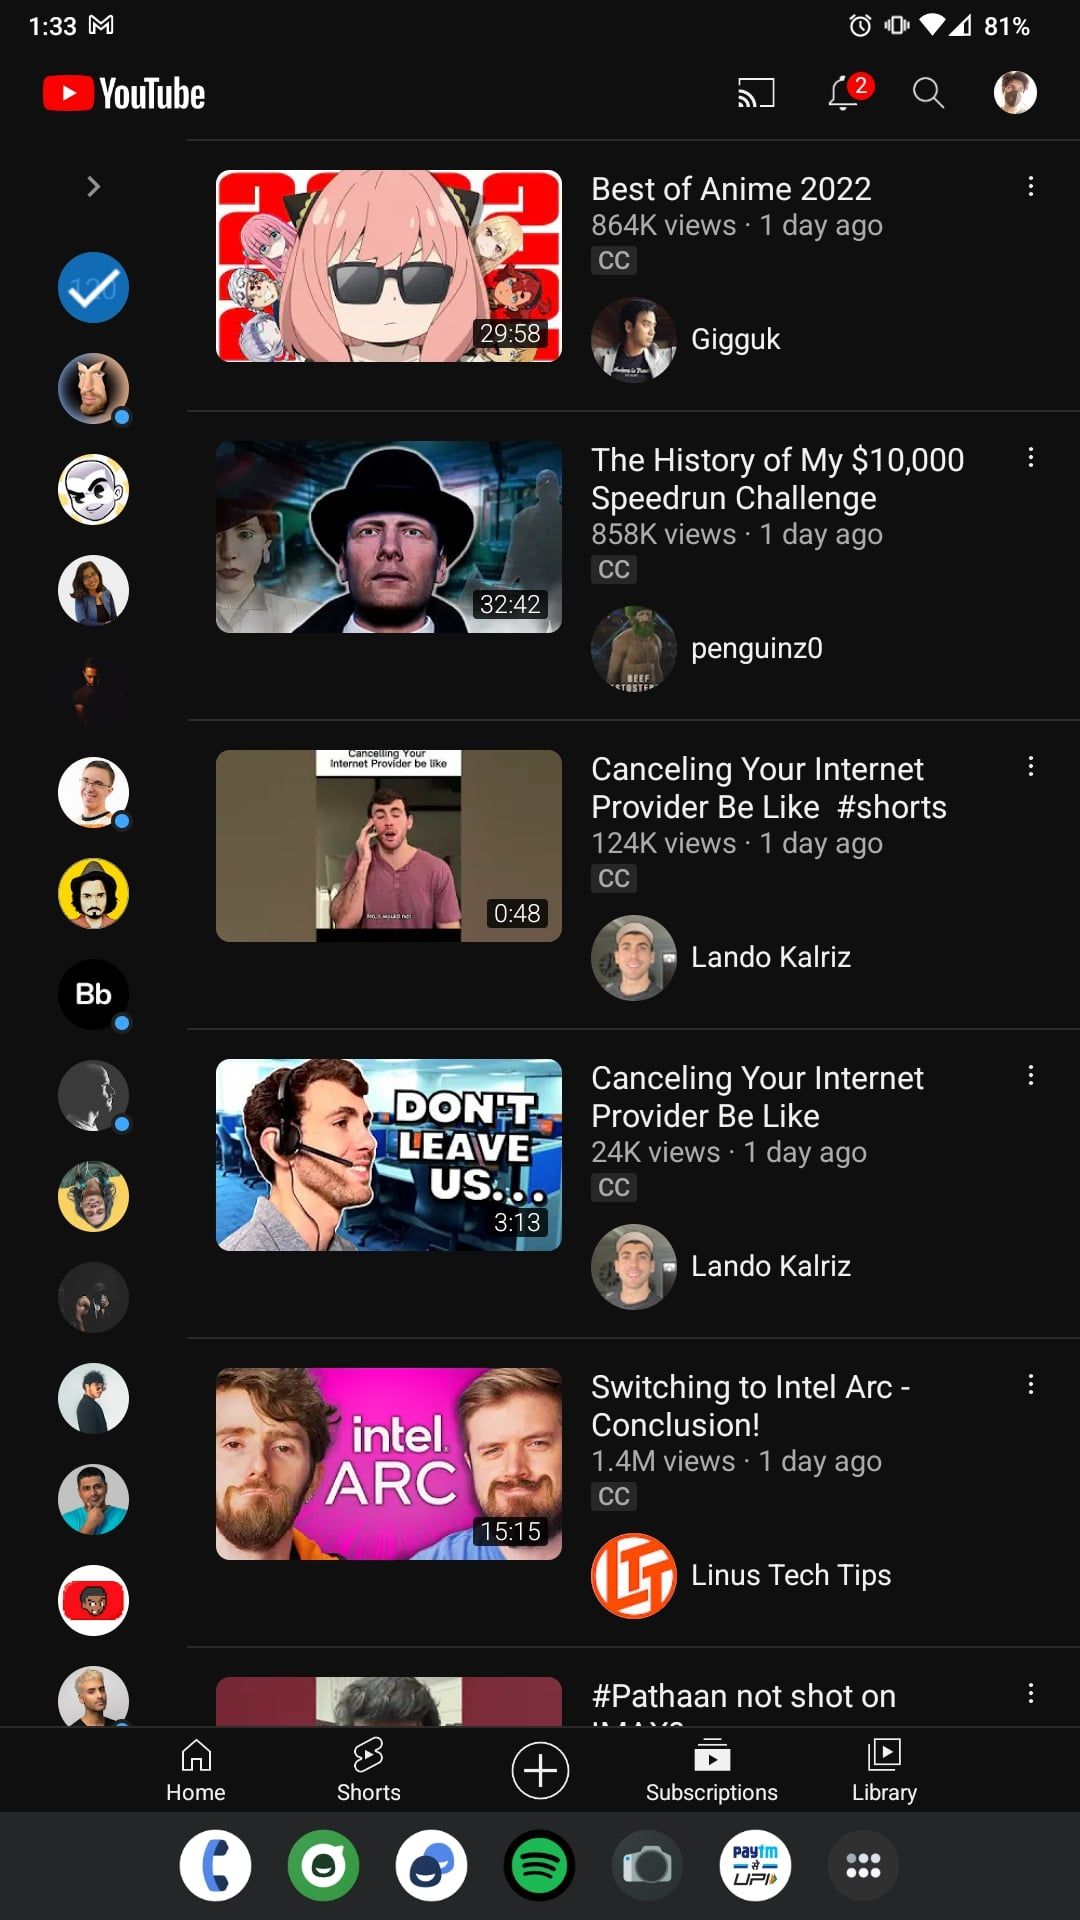 YouTube app with a tablet layout 